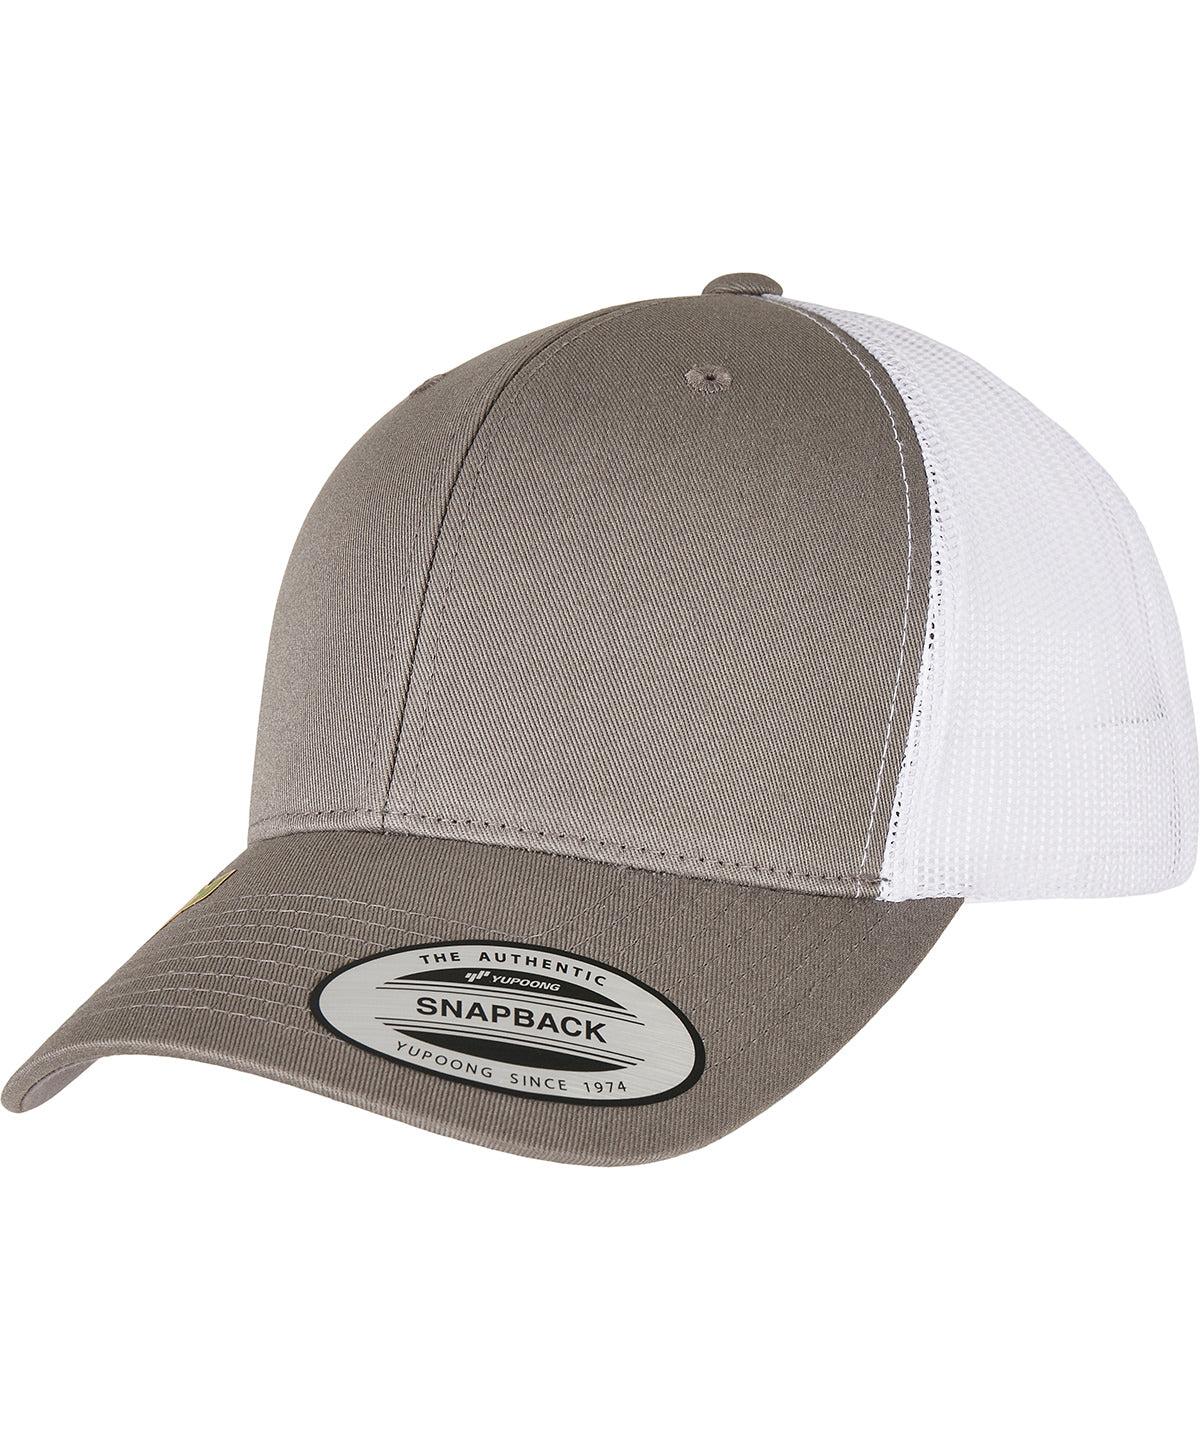 Flexfit by Yupoong YP classics recycled retro trucker cap 2-tone